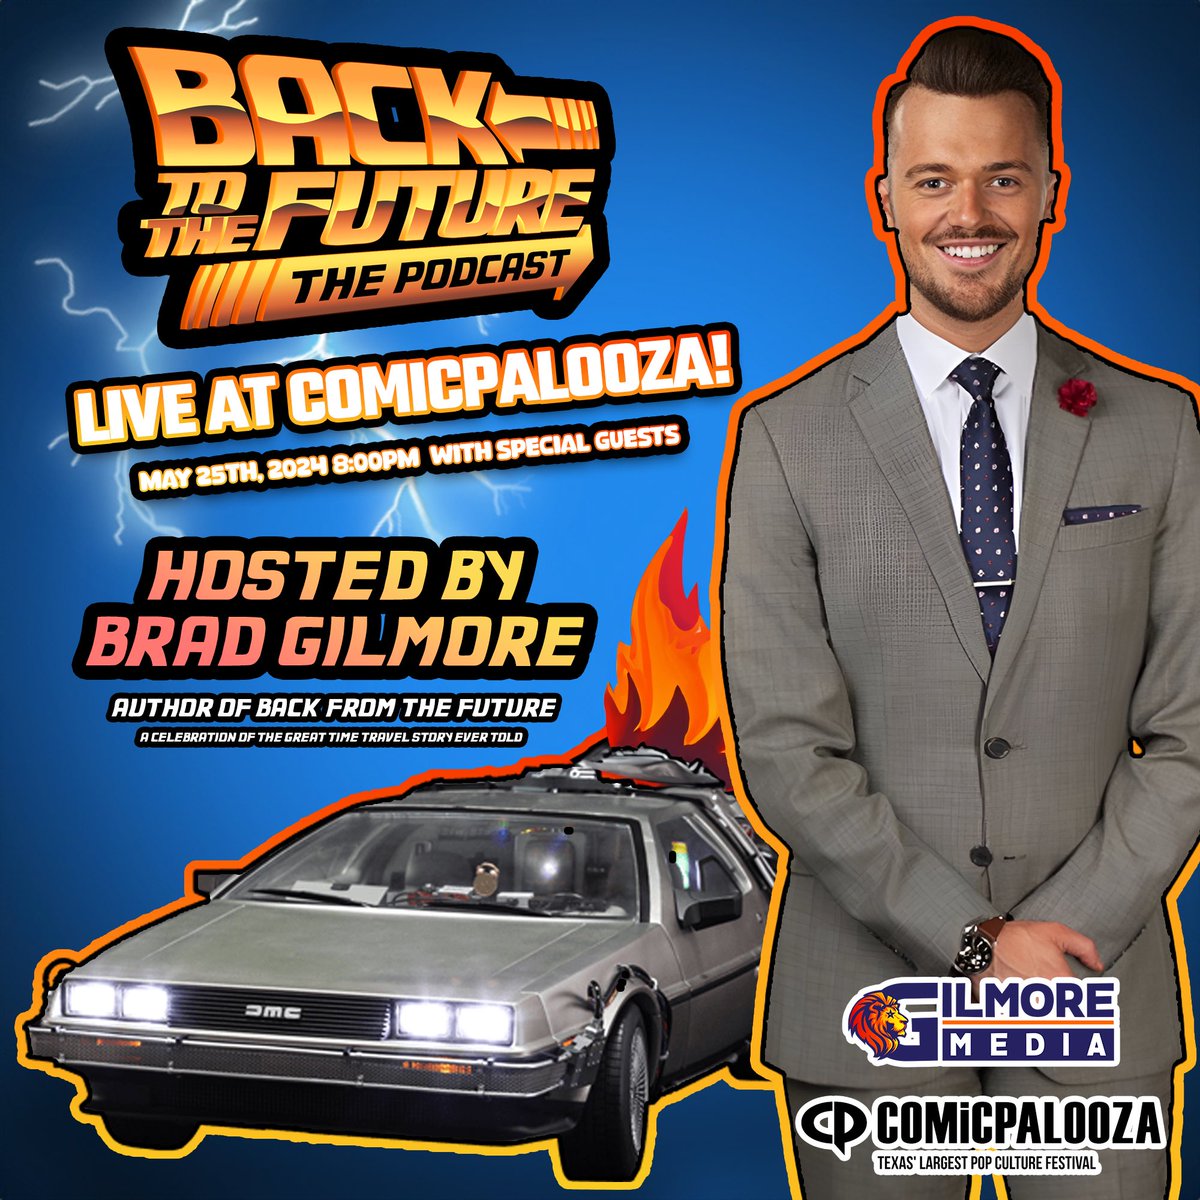 🎉 I’m thrilled to announce that I will be an official member of Comicpalooza this year, Texas’s largest pop culture festival! 🌟 As some of you may have seen, “Back to the Future” is a HUGE theme this year 🕒 with Michael J. Fox, Christopher Lloyd, and James Tolkan all in…